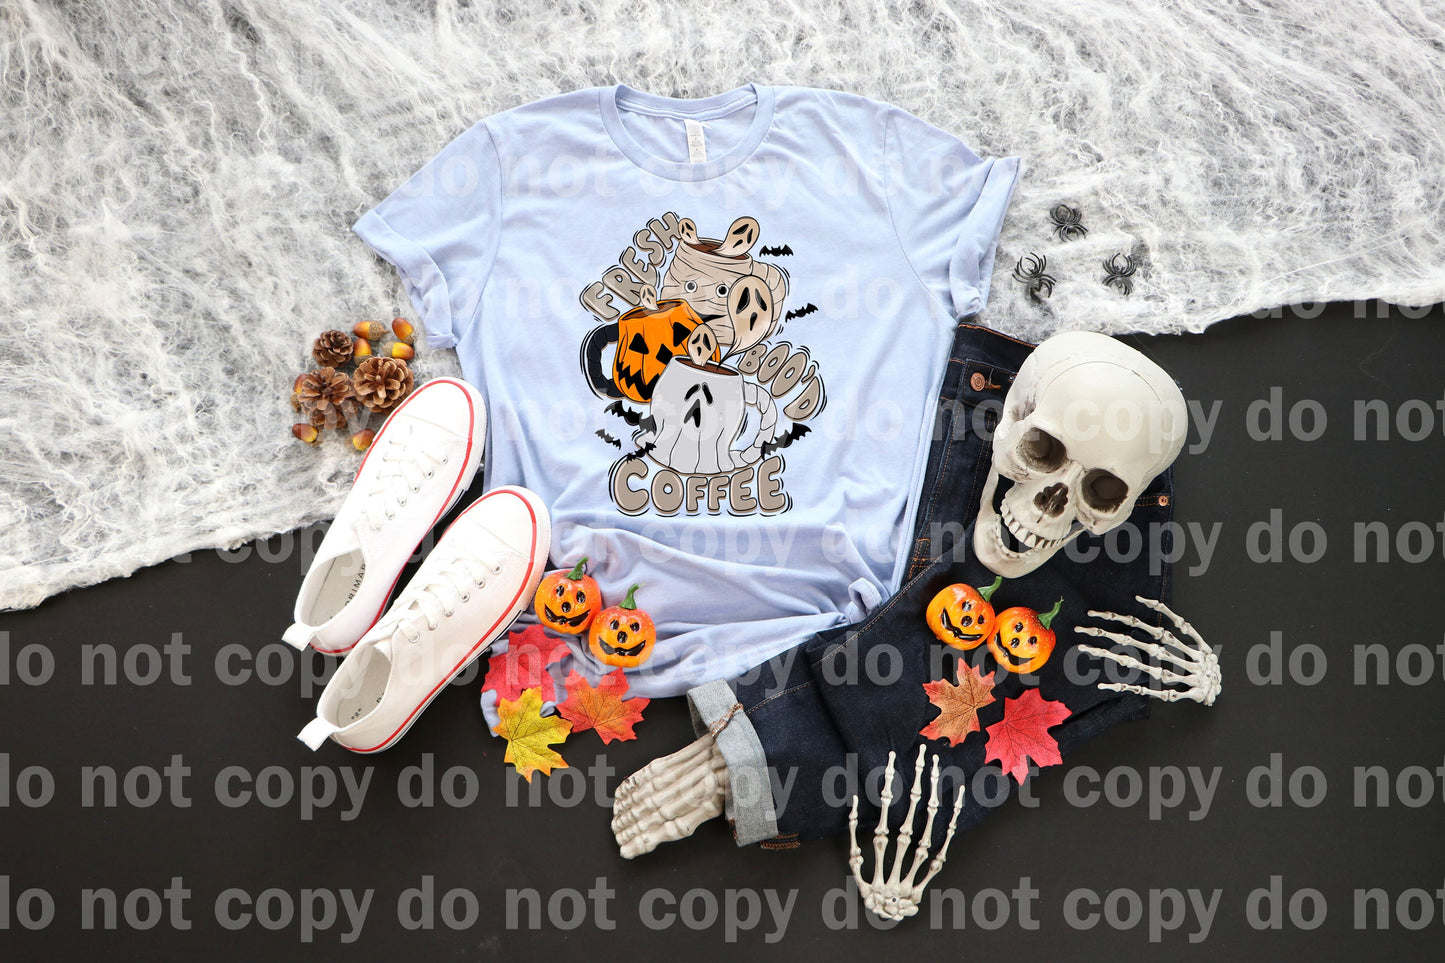 Fresh Boo'd Coffee with Optional Sleeve Design Dream Print or Sublimation Print